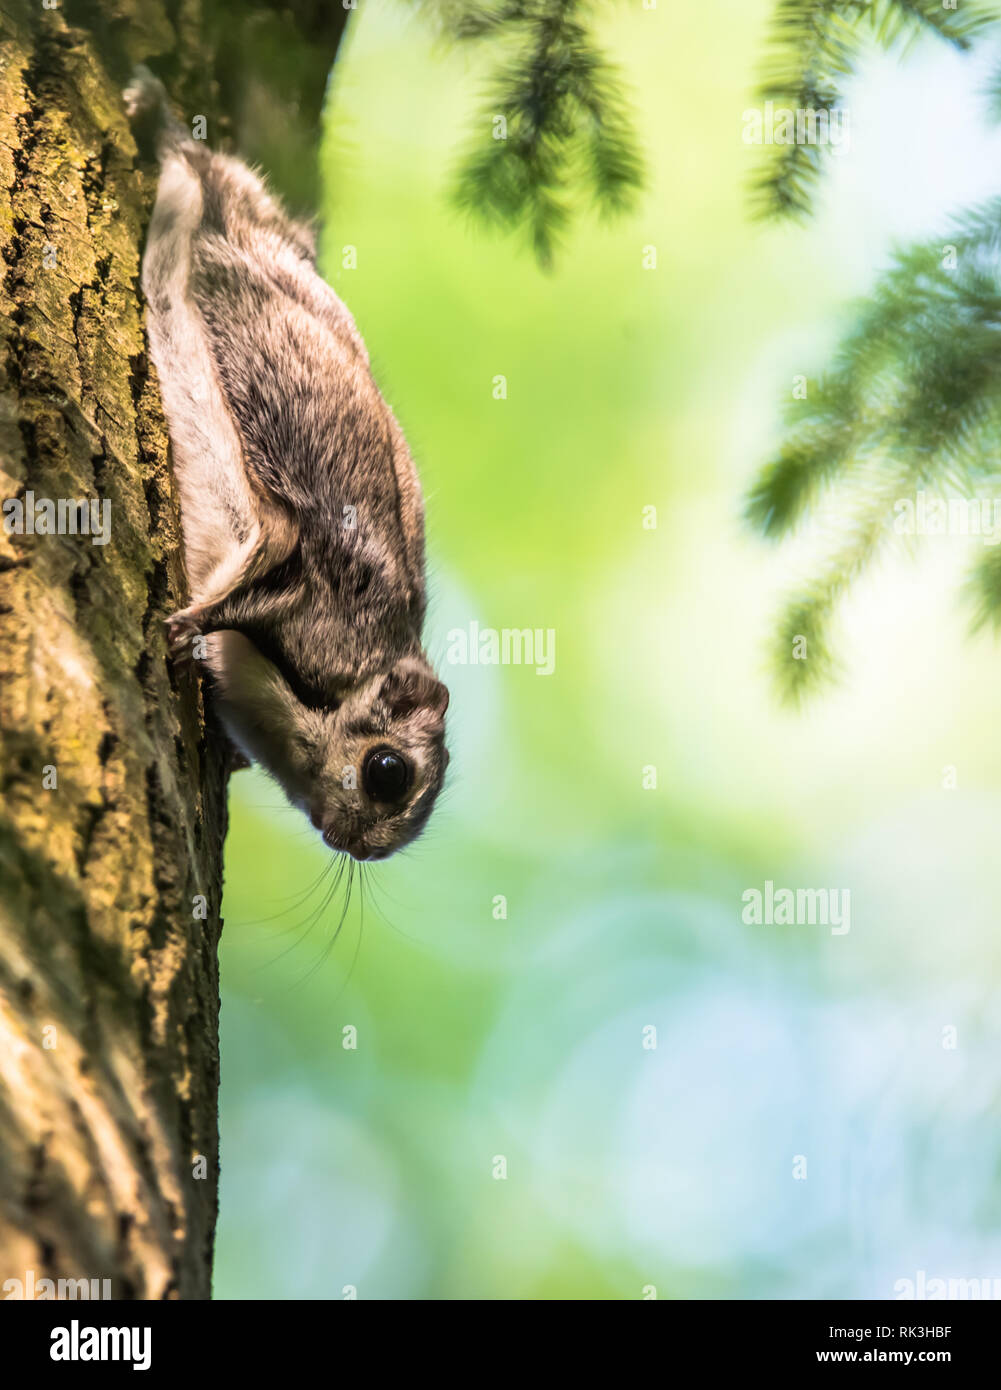 Flying Squirrel Stock Photo